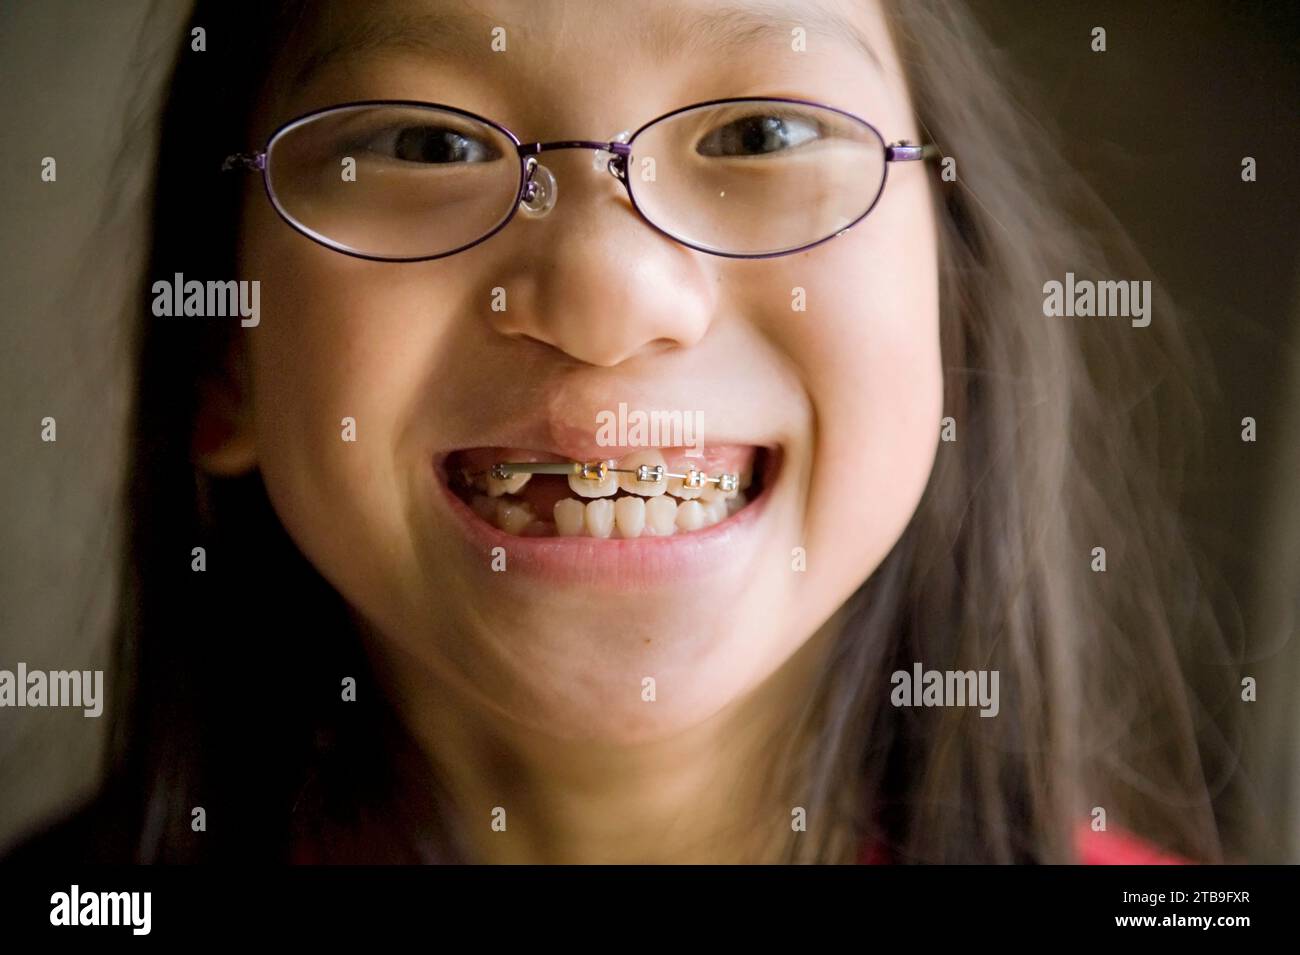 Close-up portrait of a girl with repaired cleft lip and braces smiles big for the camera; Lincoln, Nebraska, United States of America Stock Photo